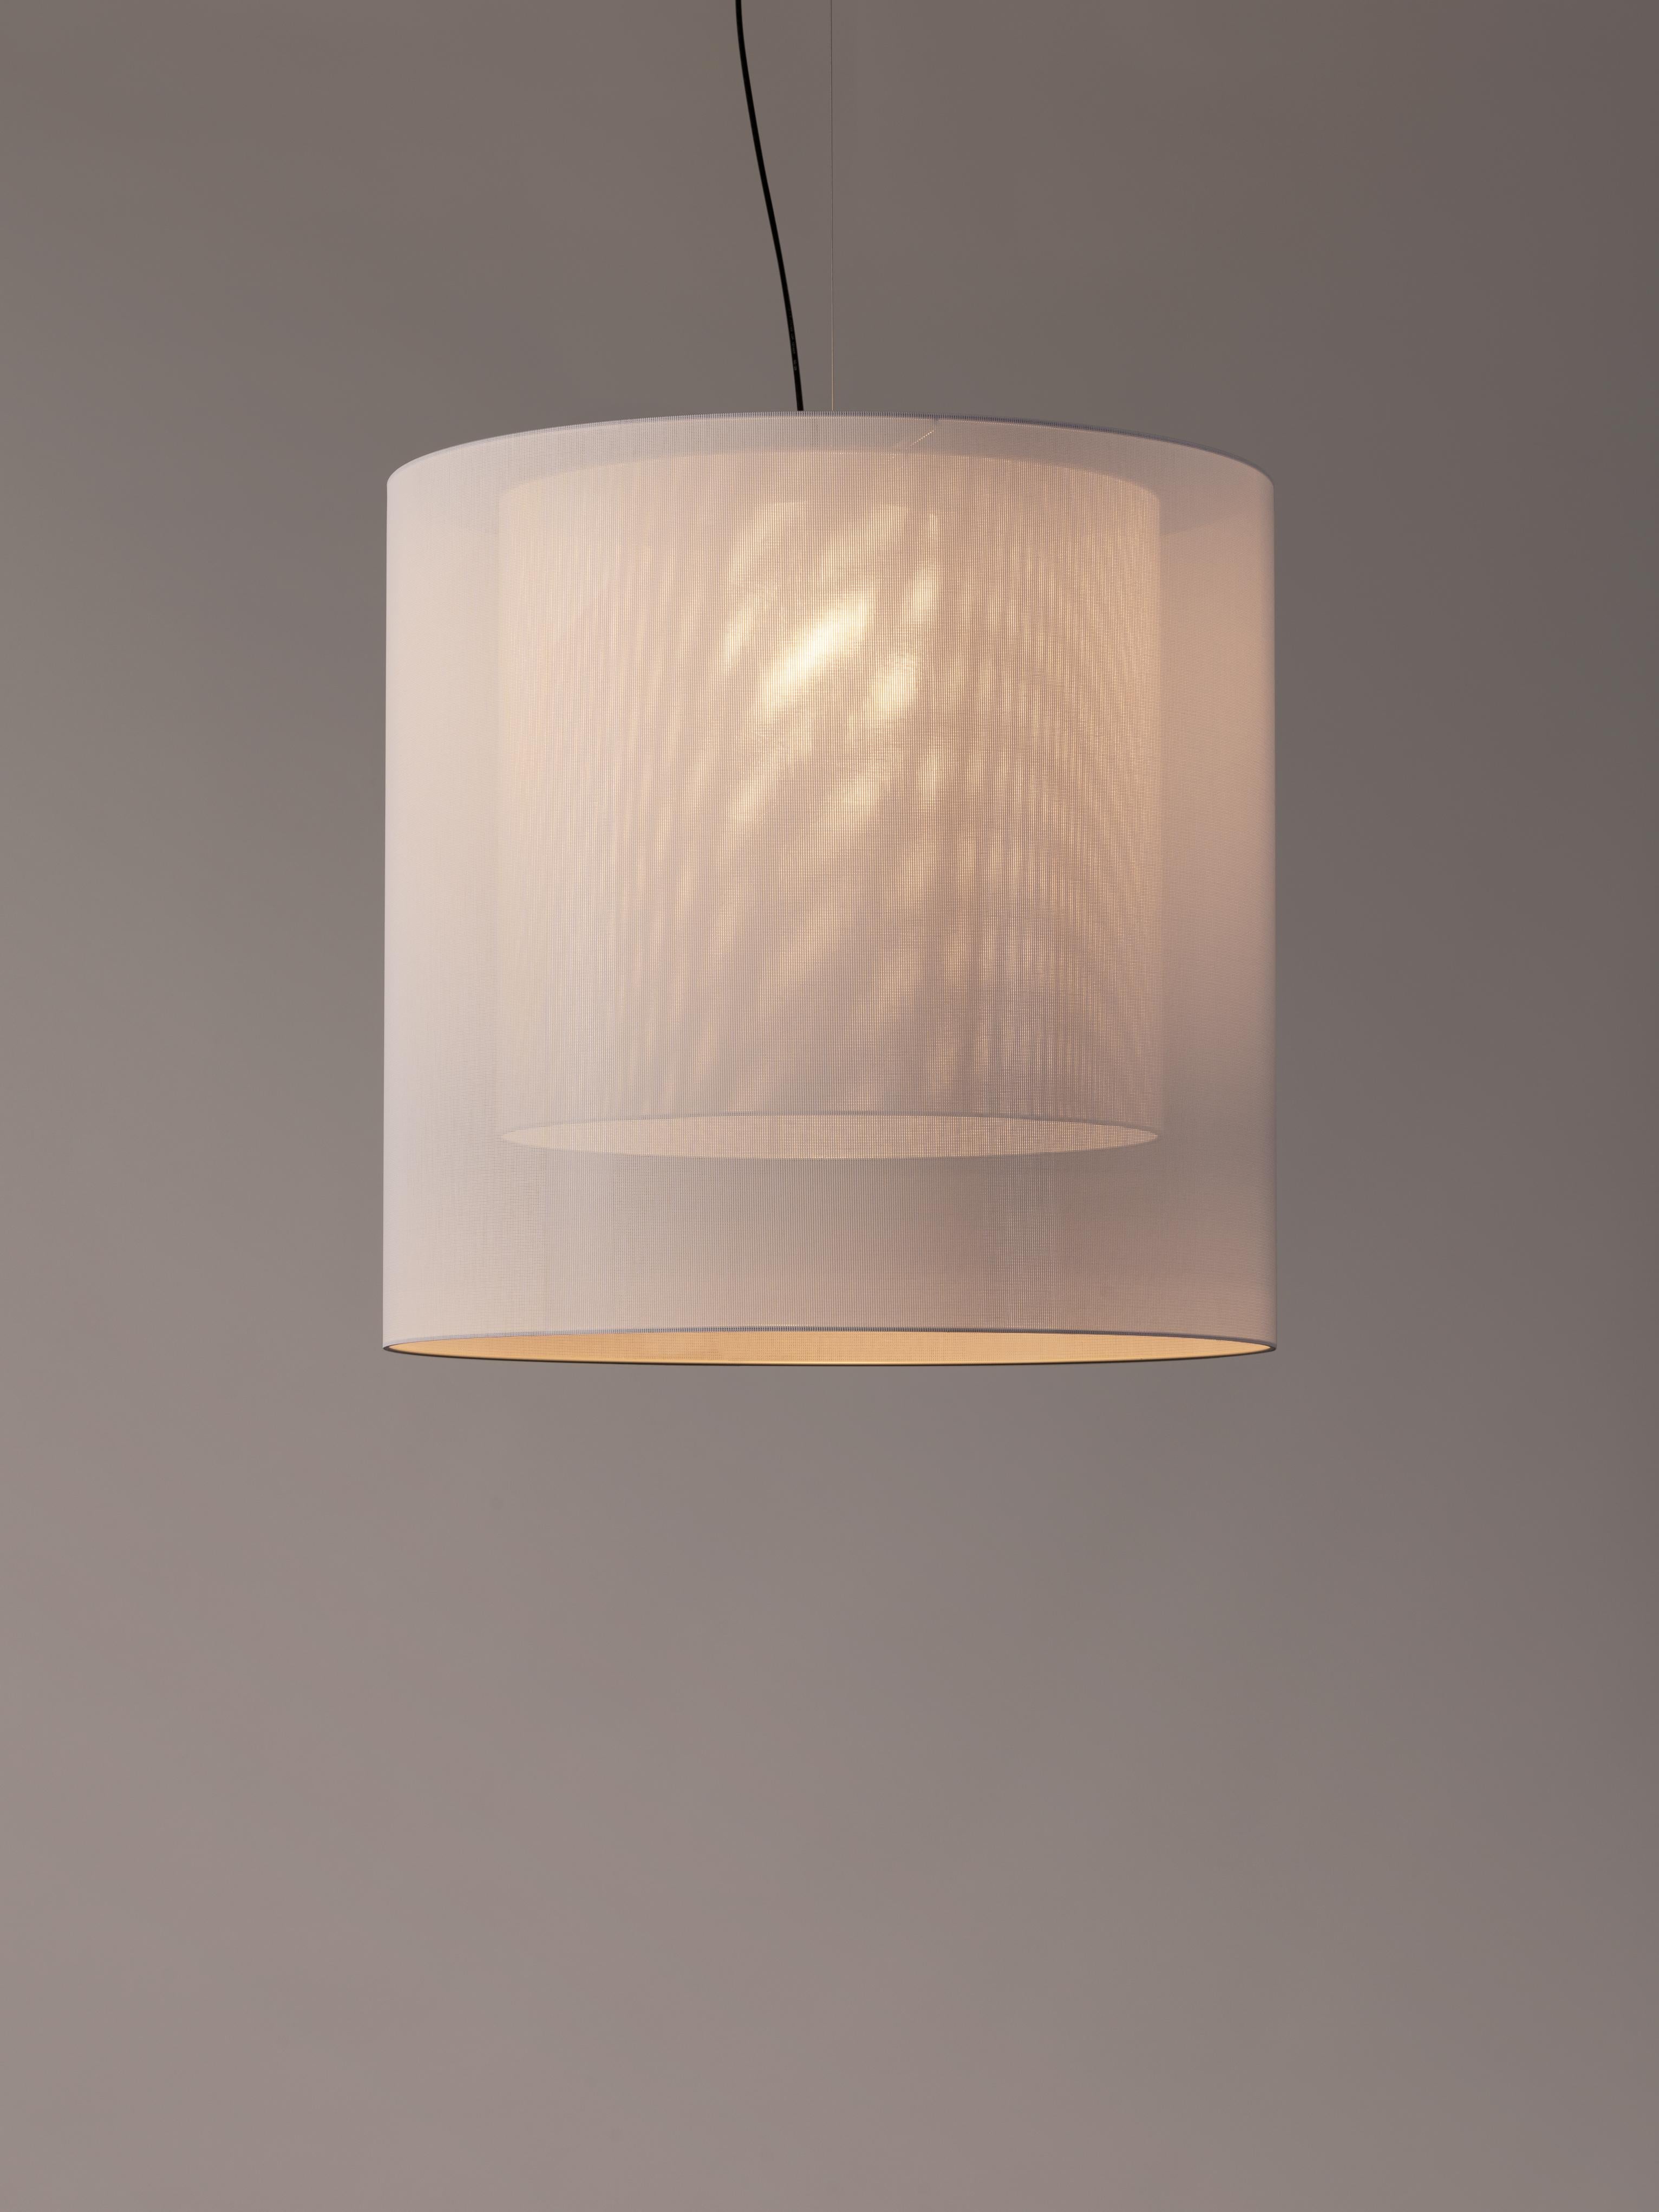 White Moaré XL Pendant Lamp by Antoni Arola
Dimensions: D 83 x H 81 cm
Materials: Metal, polyester.
Available in other colors and sizes.

Moaré’s multiple combinations of formats and colours make it highly versatile. The series takes its name